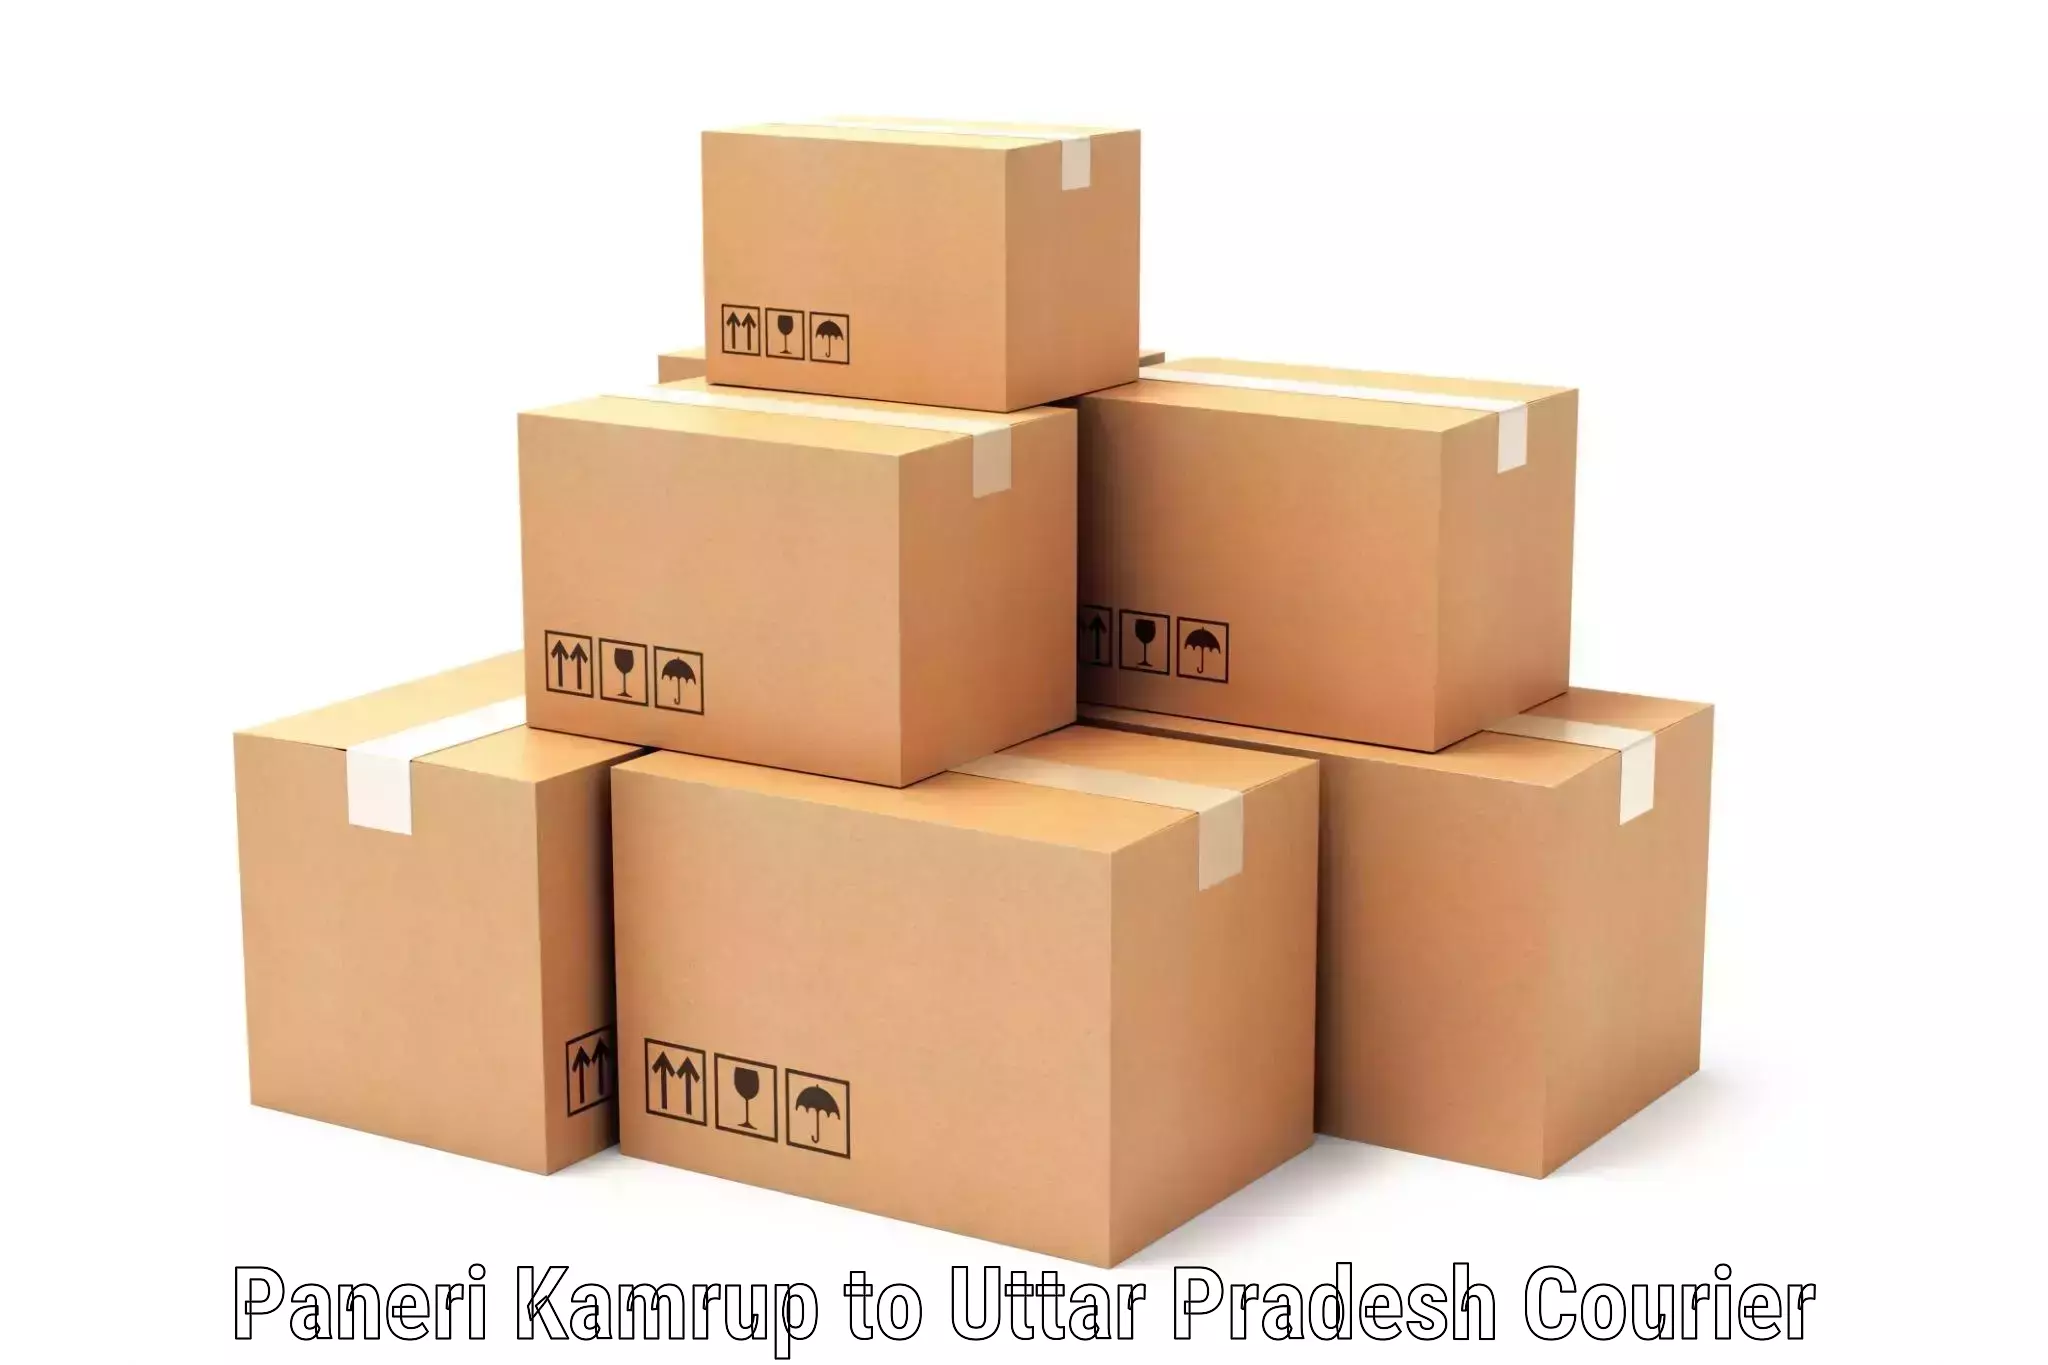 Global parcel delivery Paneri Kamrup to Faridpur